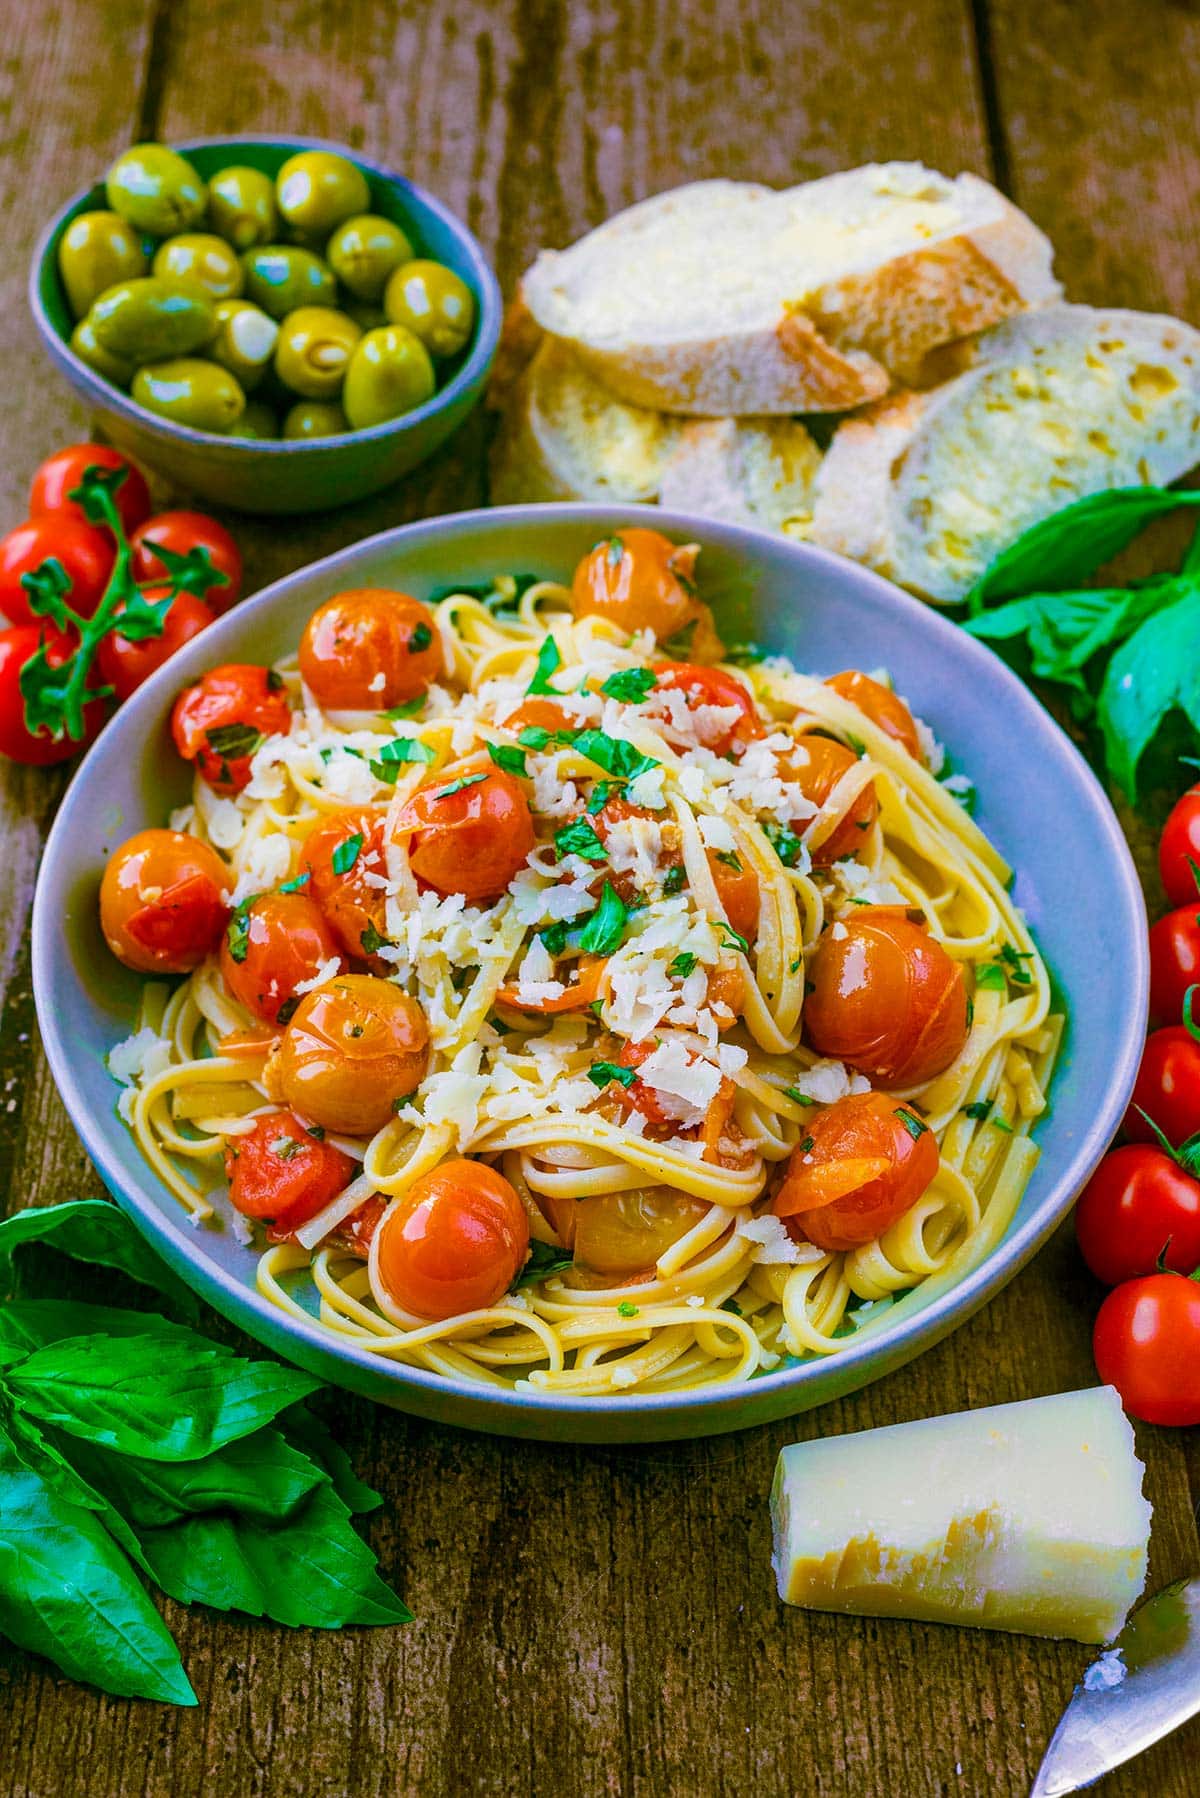 A bowl of pasta and tomatoes in front of a bowl of olives and some slices of buttered bread.